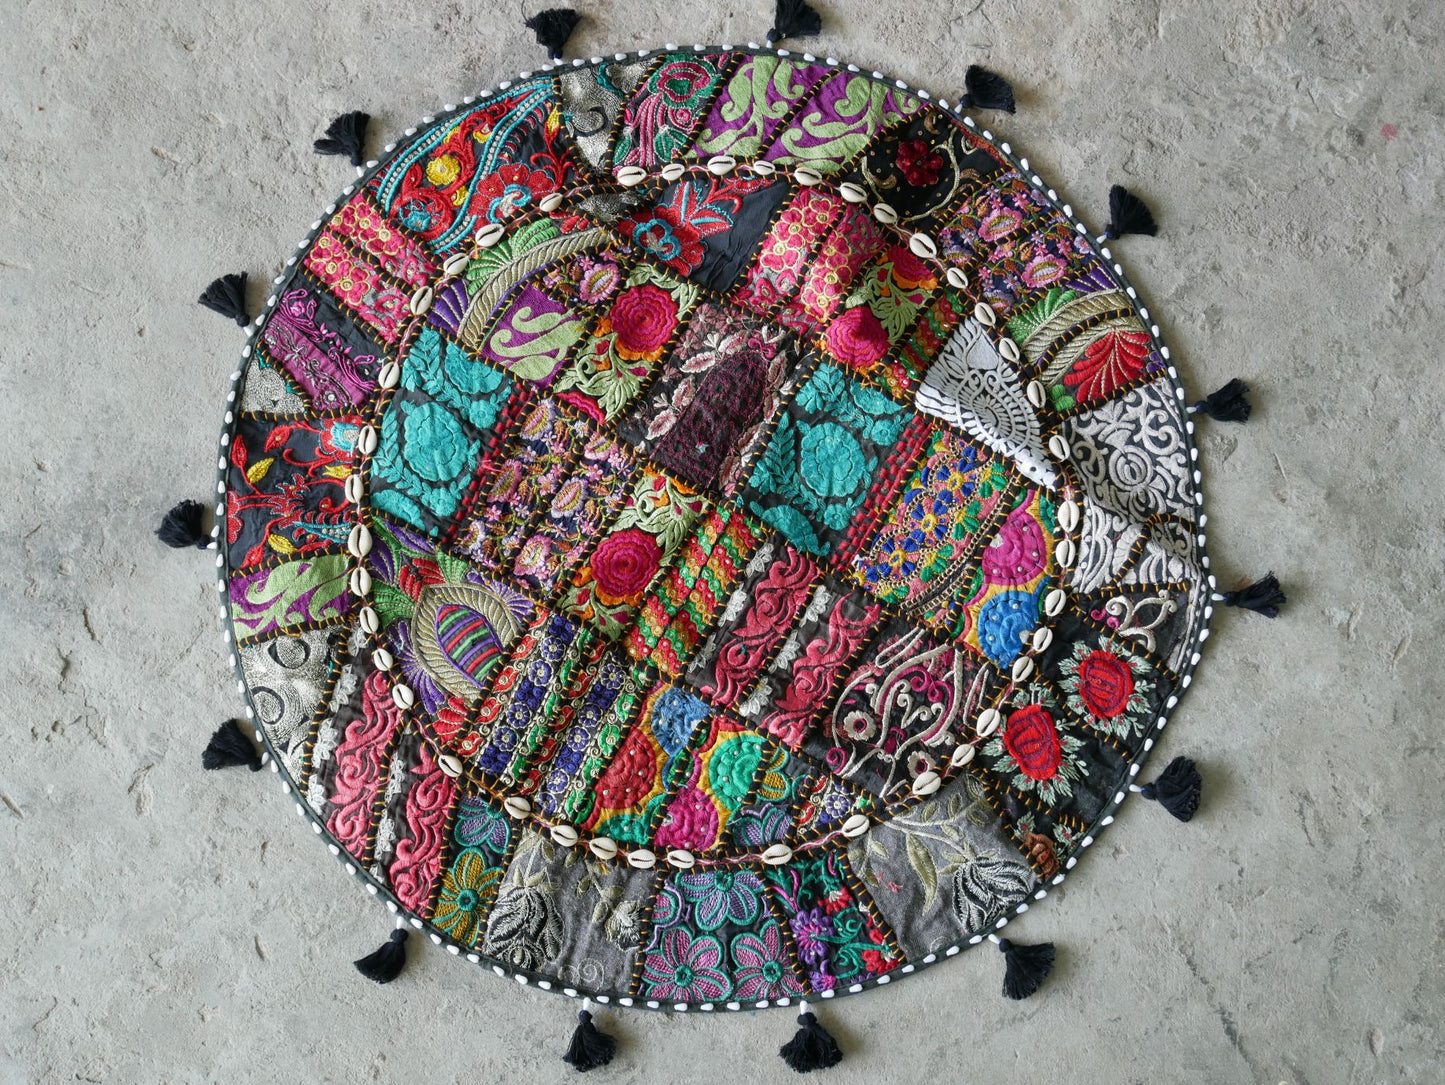 Patchwork floor pillow cover - colorful meditation cushion - Indian boho style floor seating.